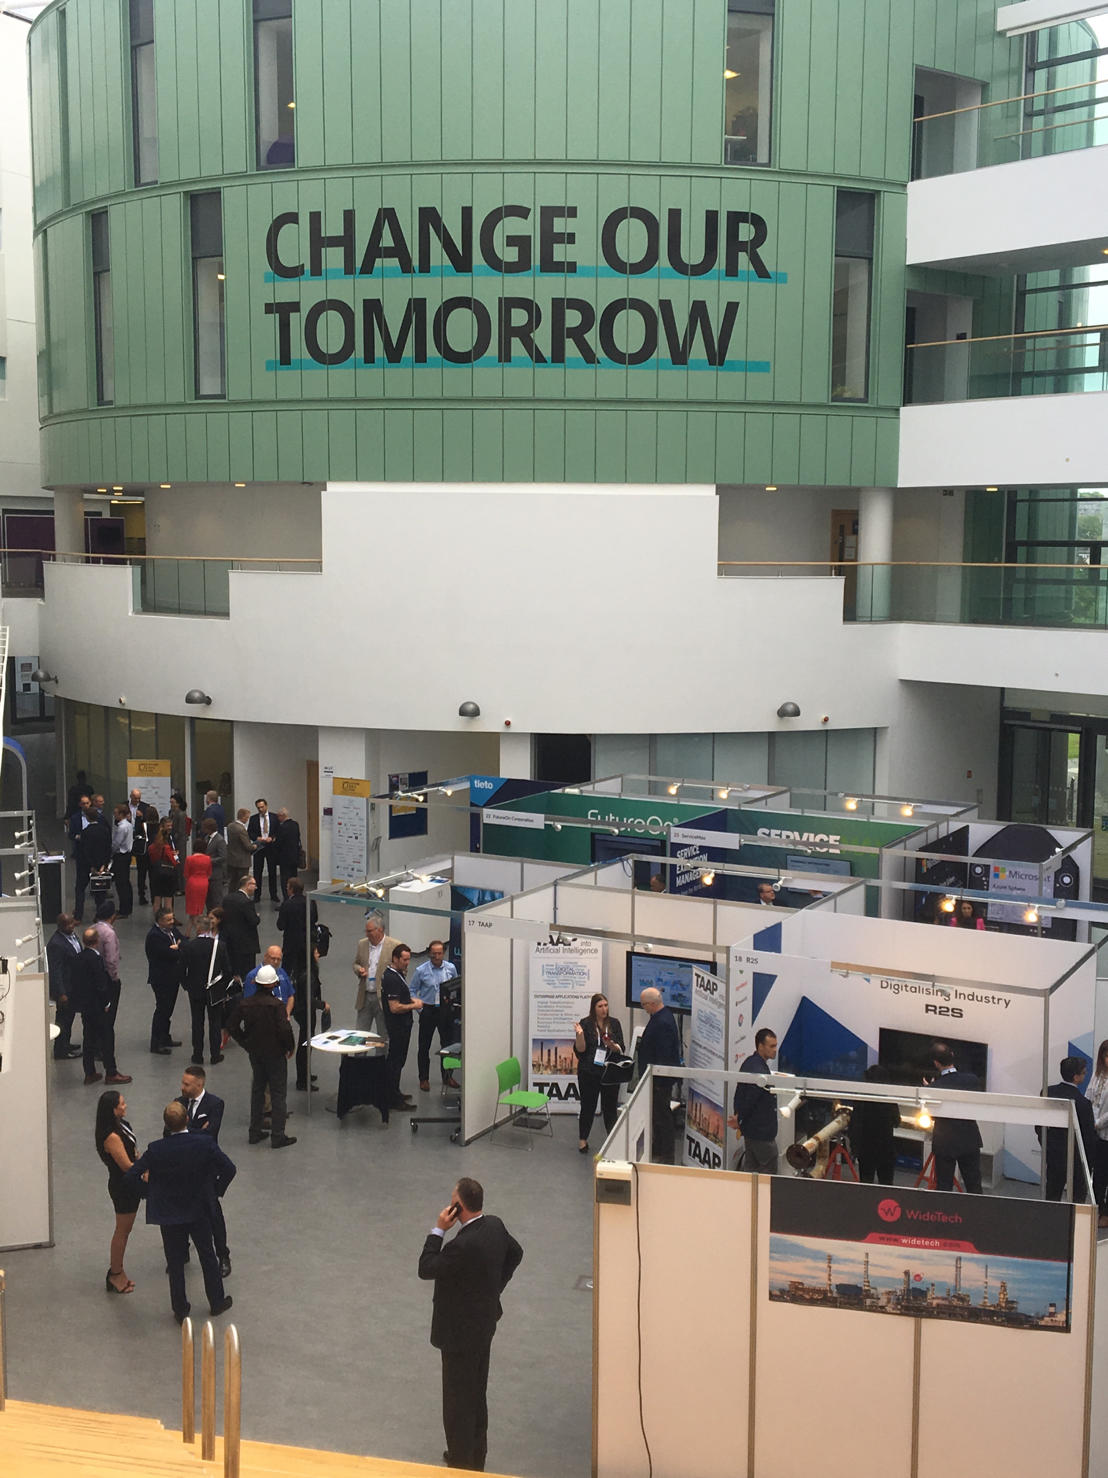 Future Oil and Gas event showing "change our tomorrow" banner